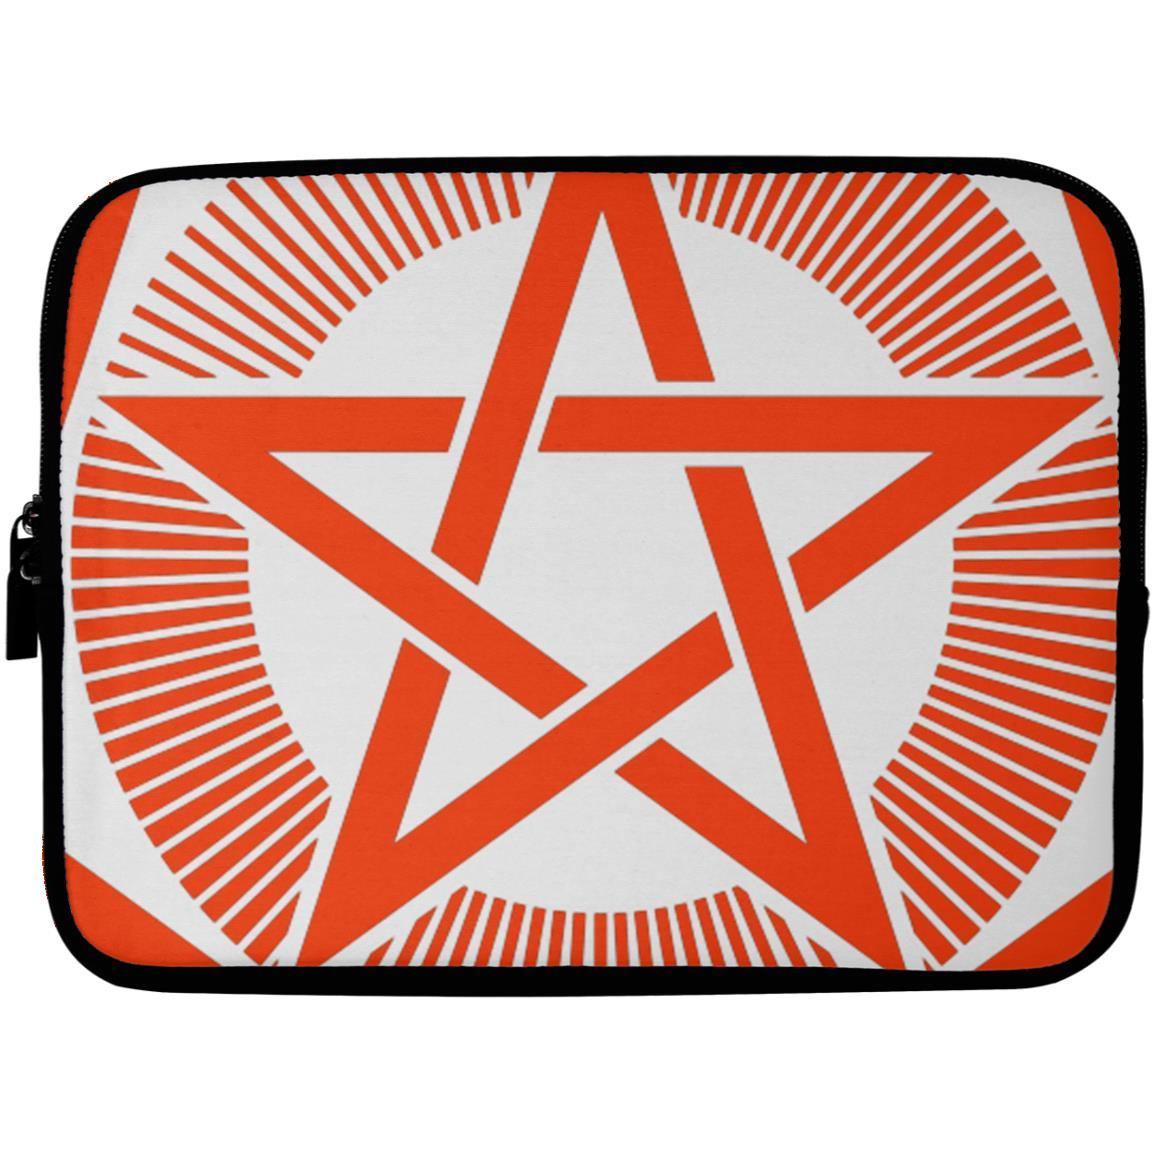 Crop Circle Laptop Sleeve - Barton-Le-Cley - Shapes of Wisdom